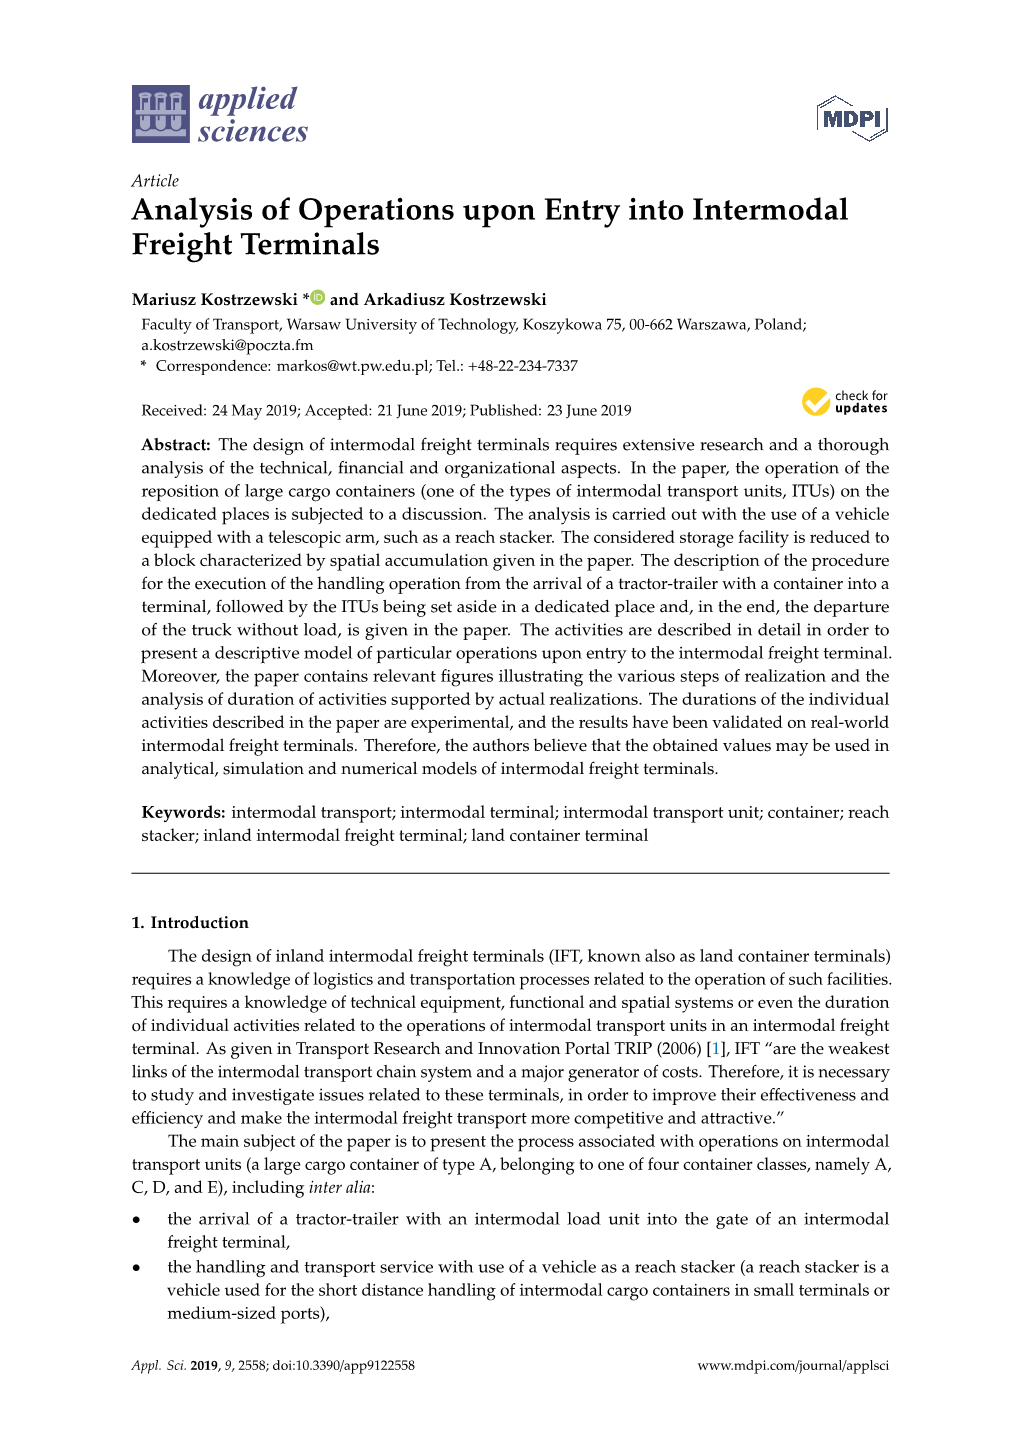 Analysis of Operations Upon Entry Into Intermodal Freight Terminals